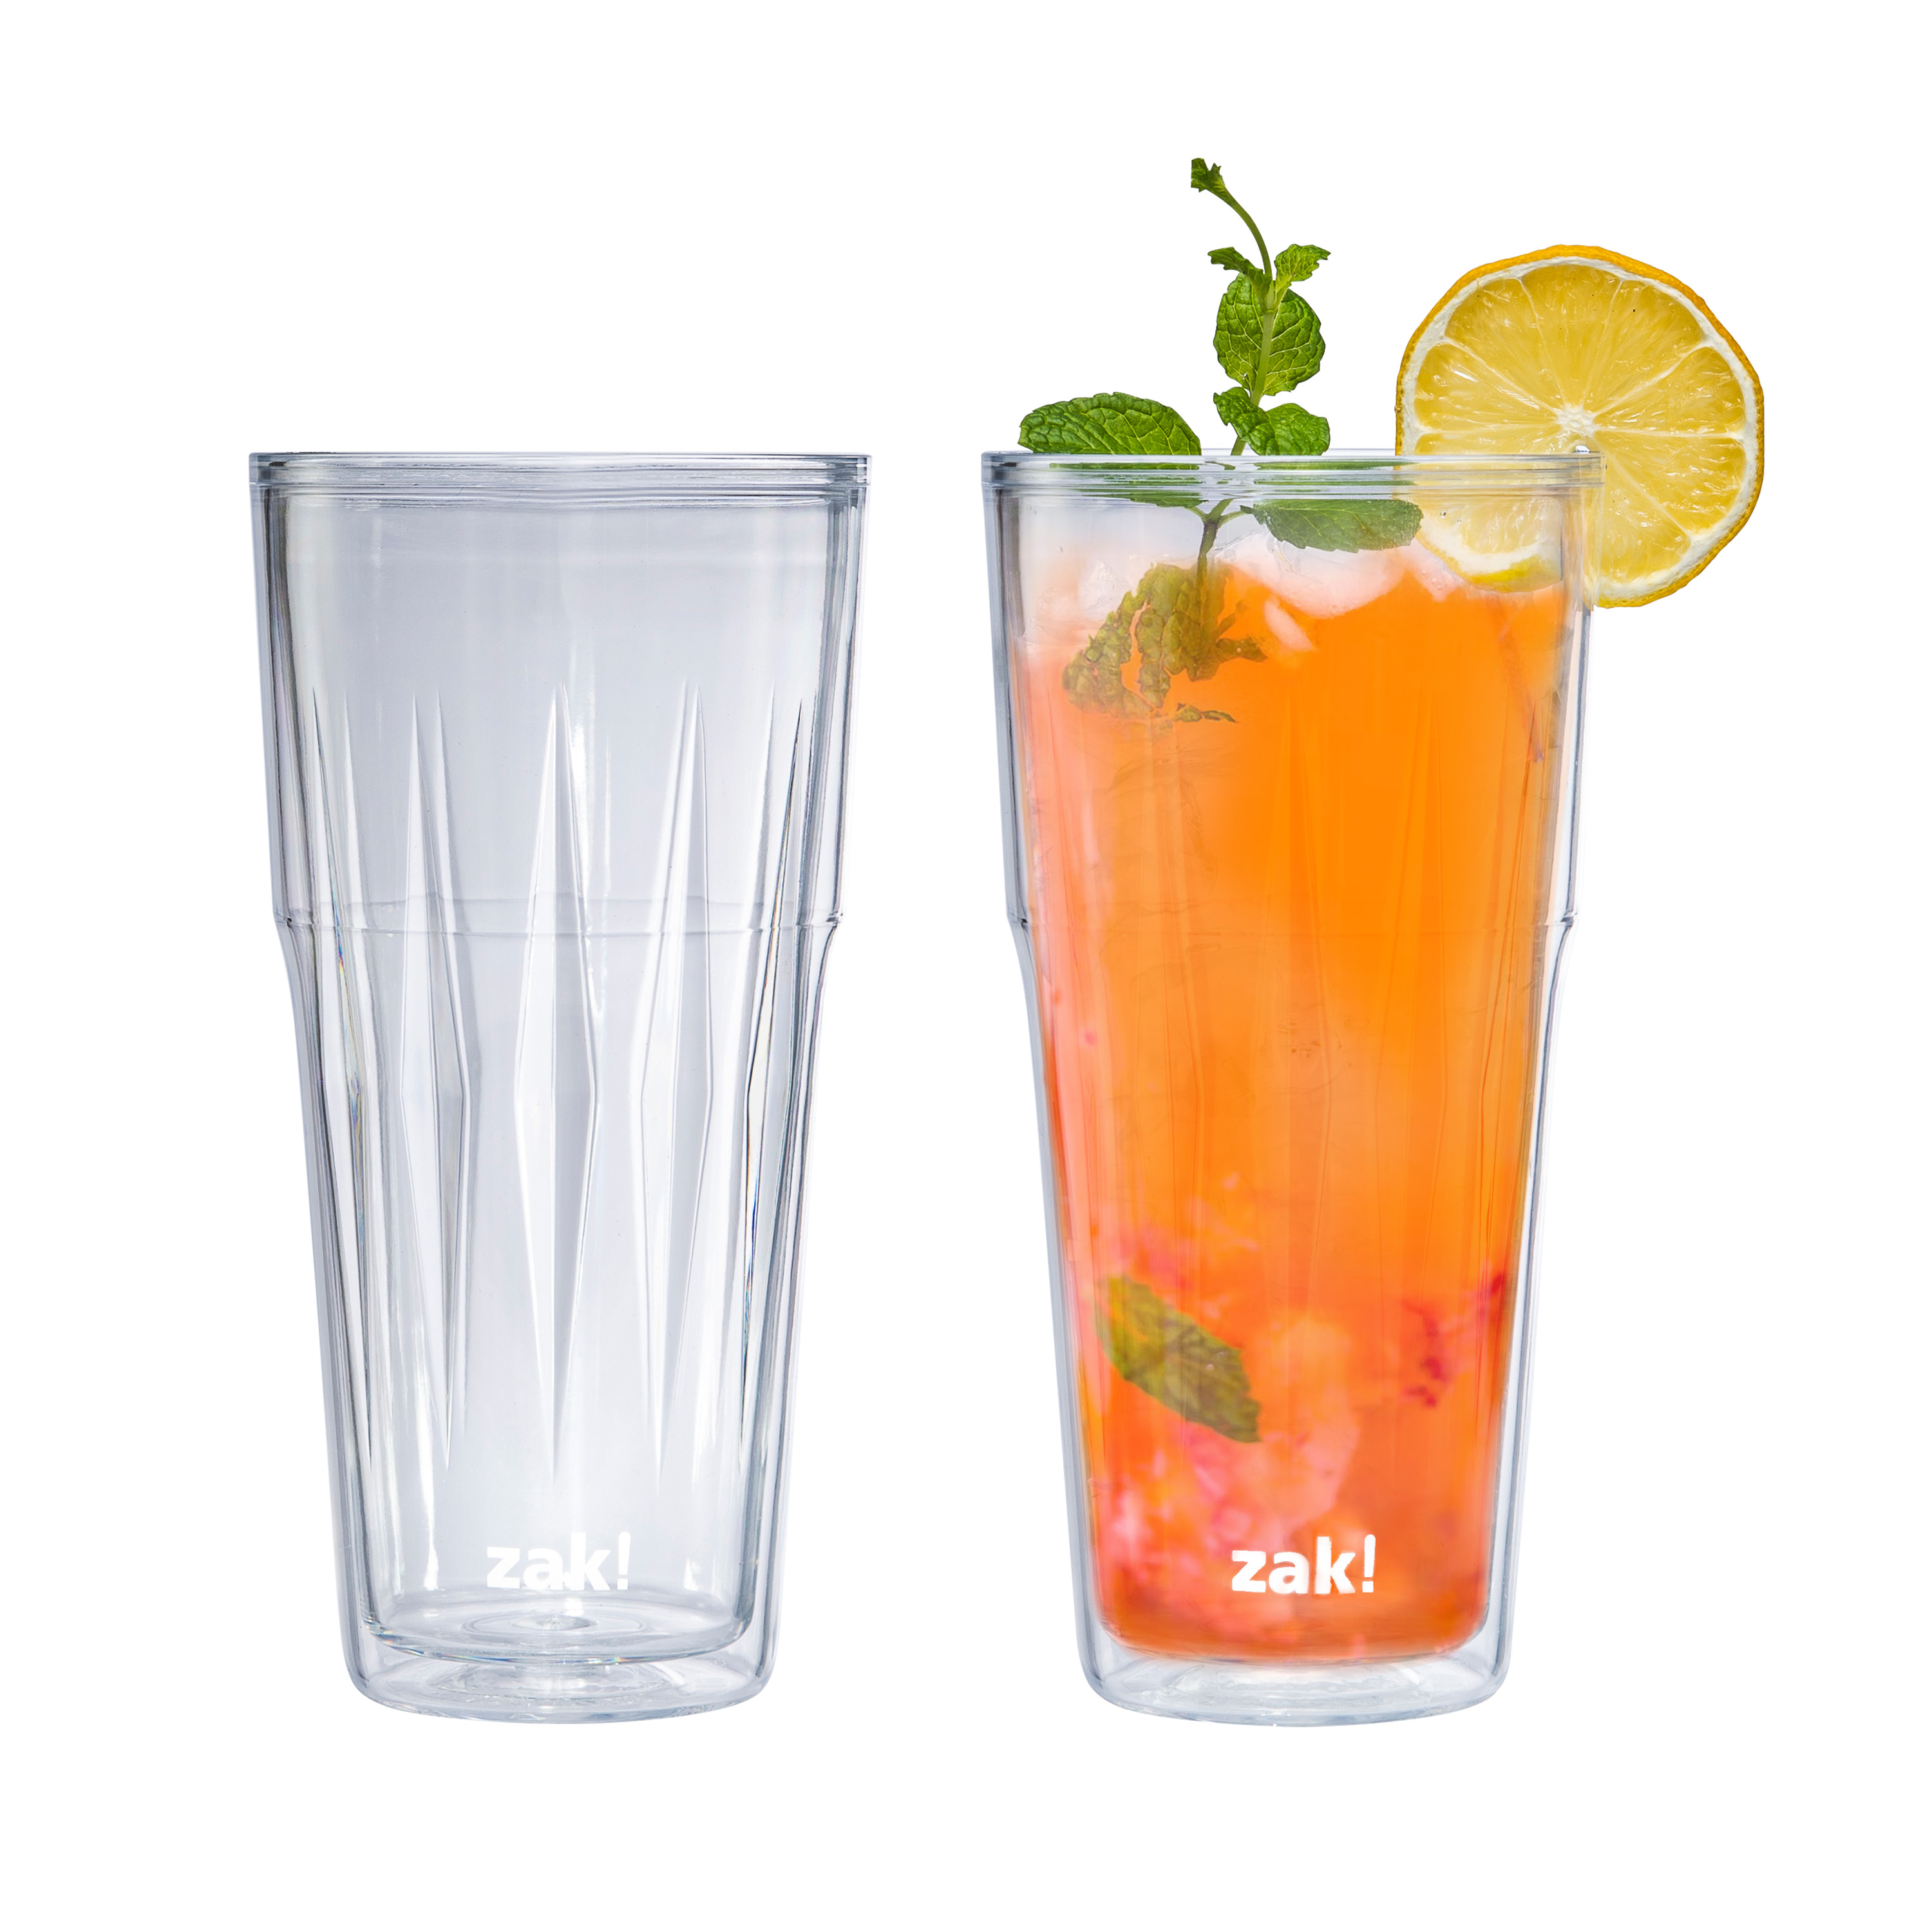 Zak Hydration 25 ounce Double-Wall Insulated Reusable Plastic Tumbler, Clear, 2-piece set slideshow image 3